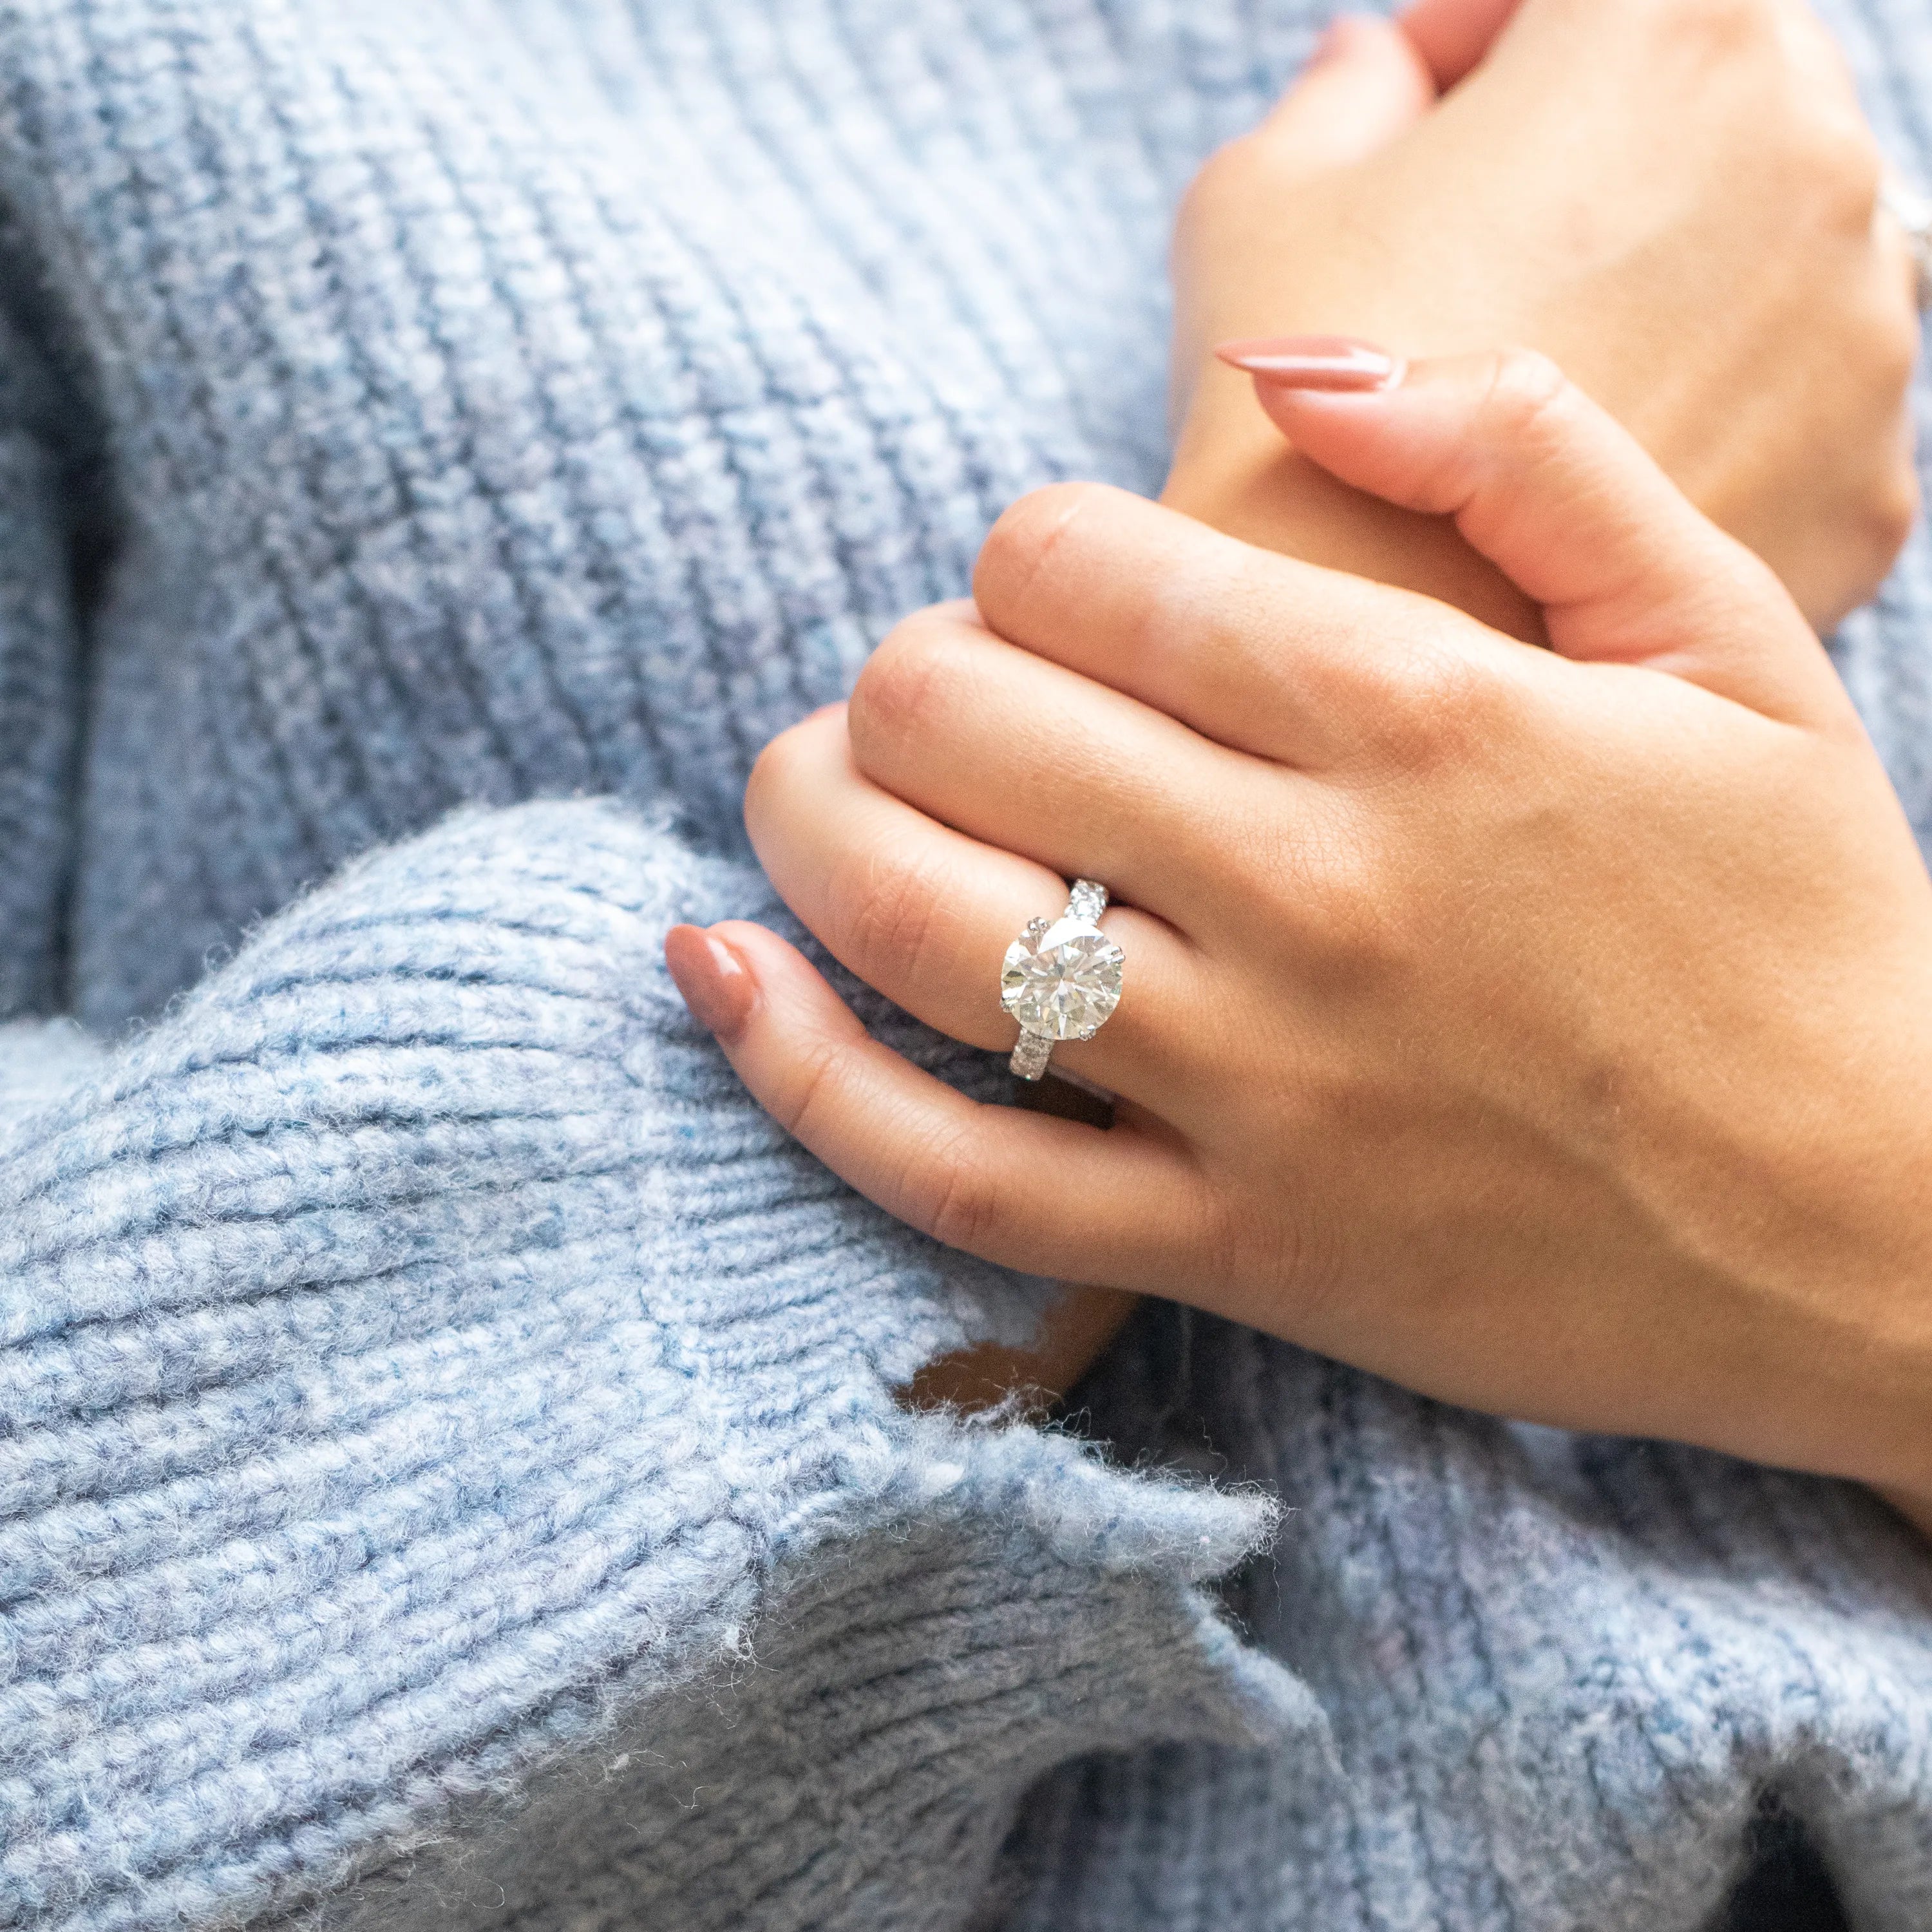 Tips for Keeping Your Engagement Ring Sparkling